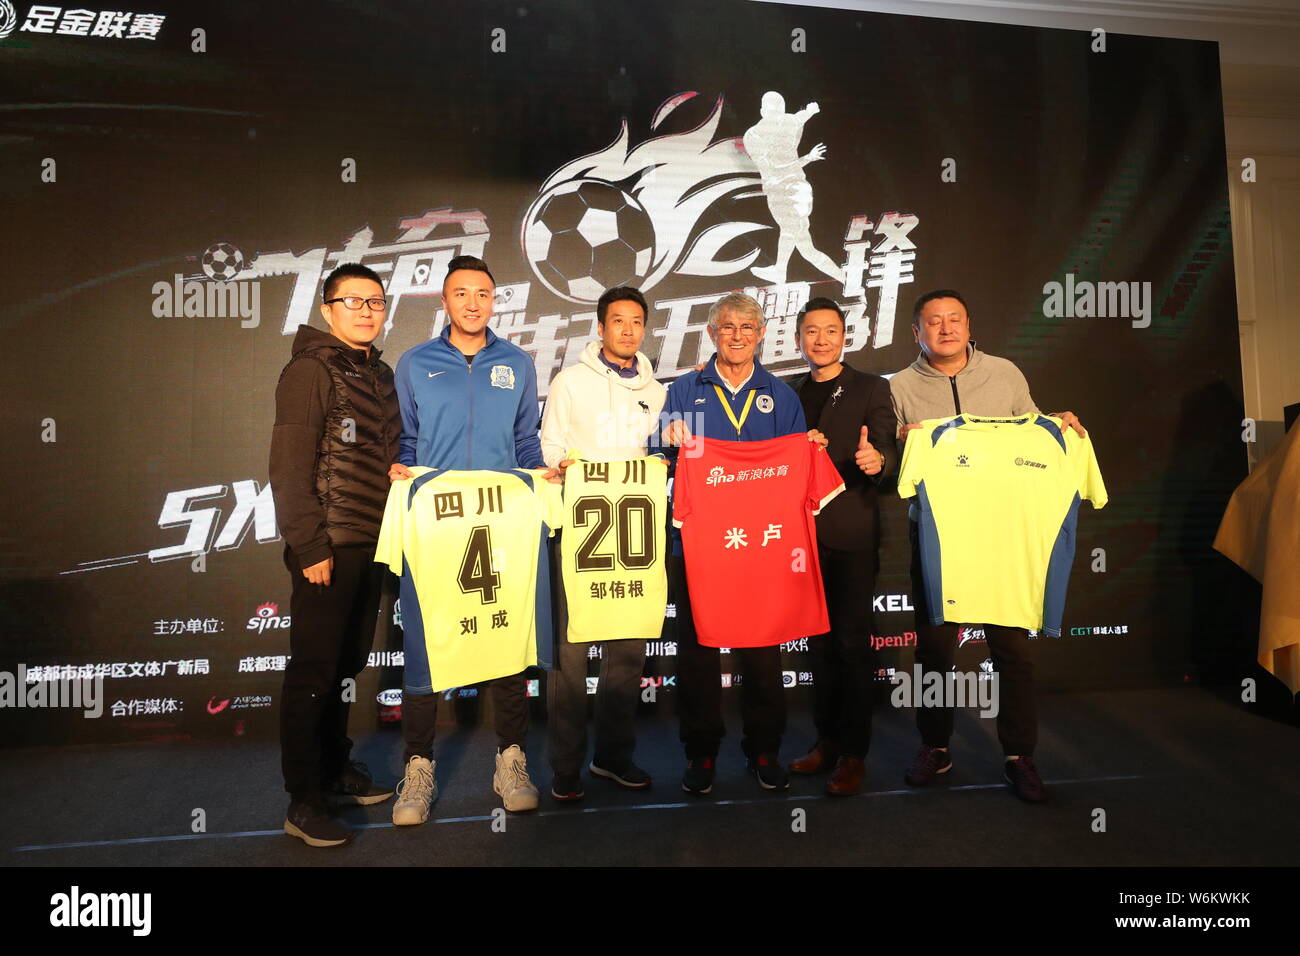 Serbian football coach and former player Bora Milutinovic, third right, attends a press conference of Sina 5v5 Football Golden League Finals in Chengd Stock Photo